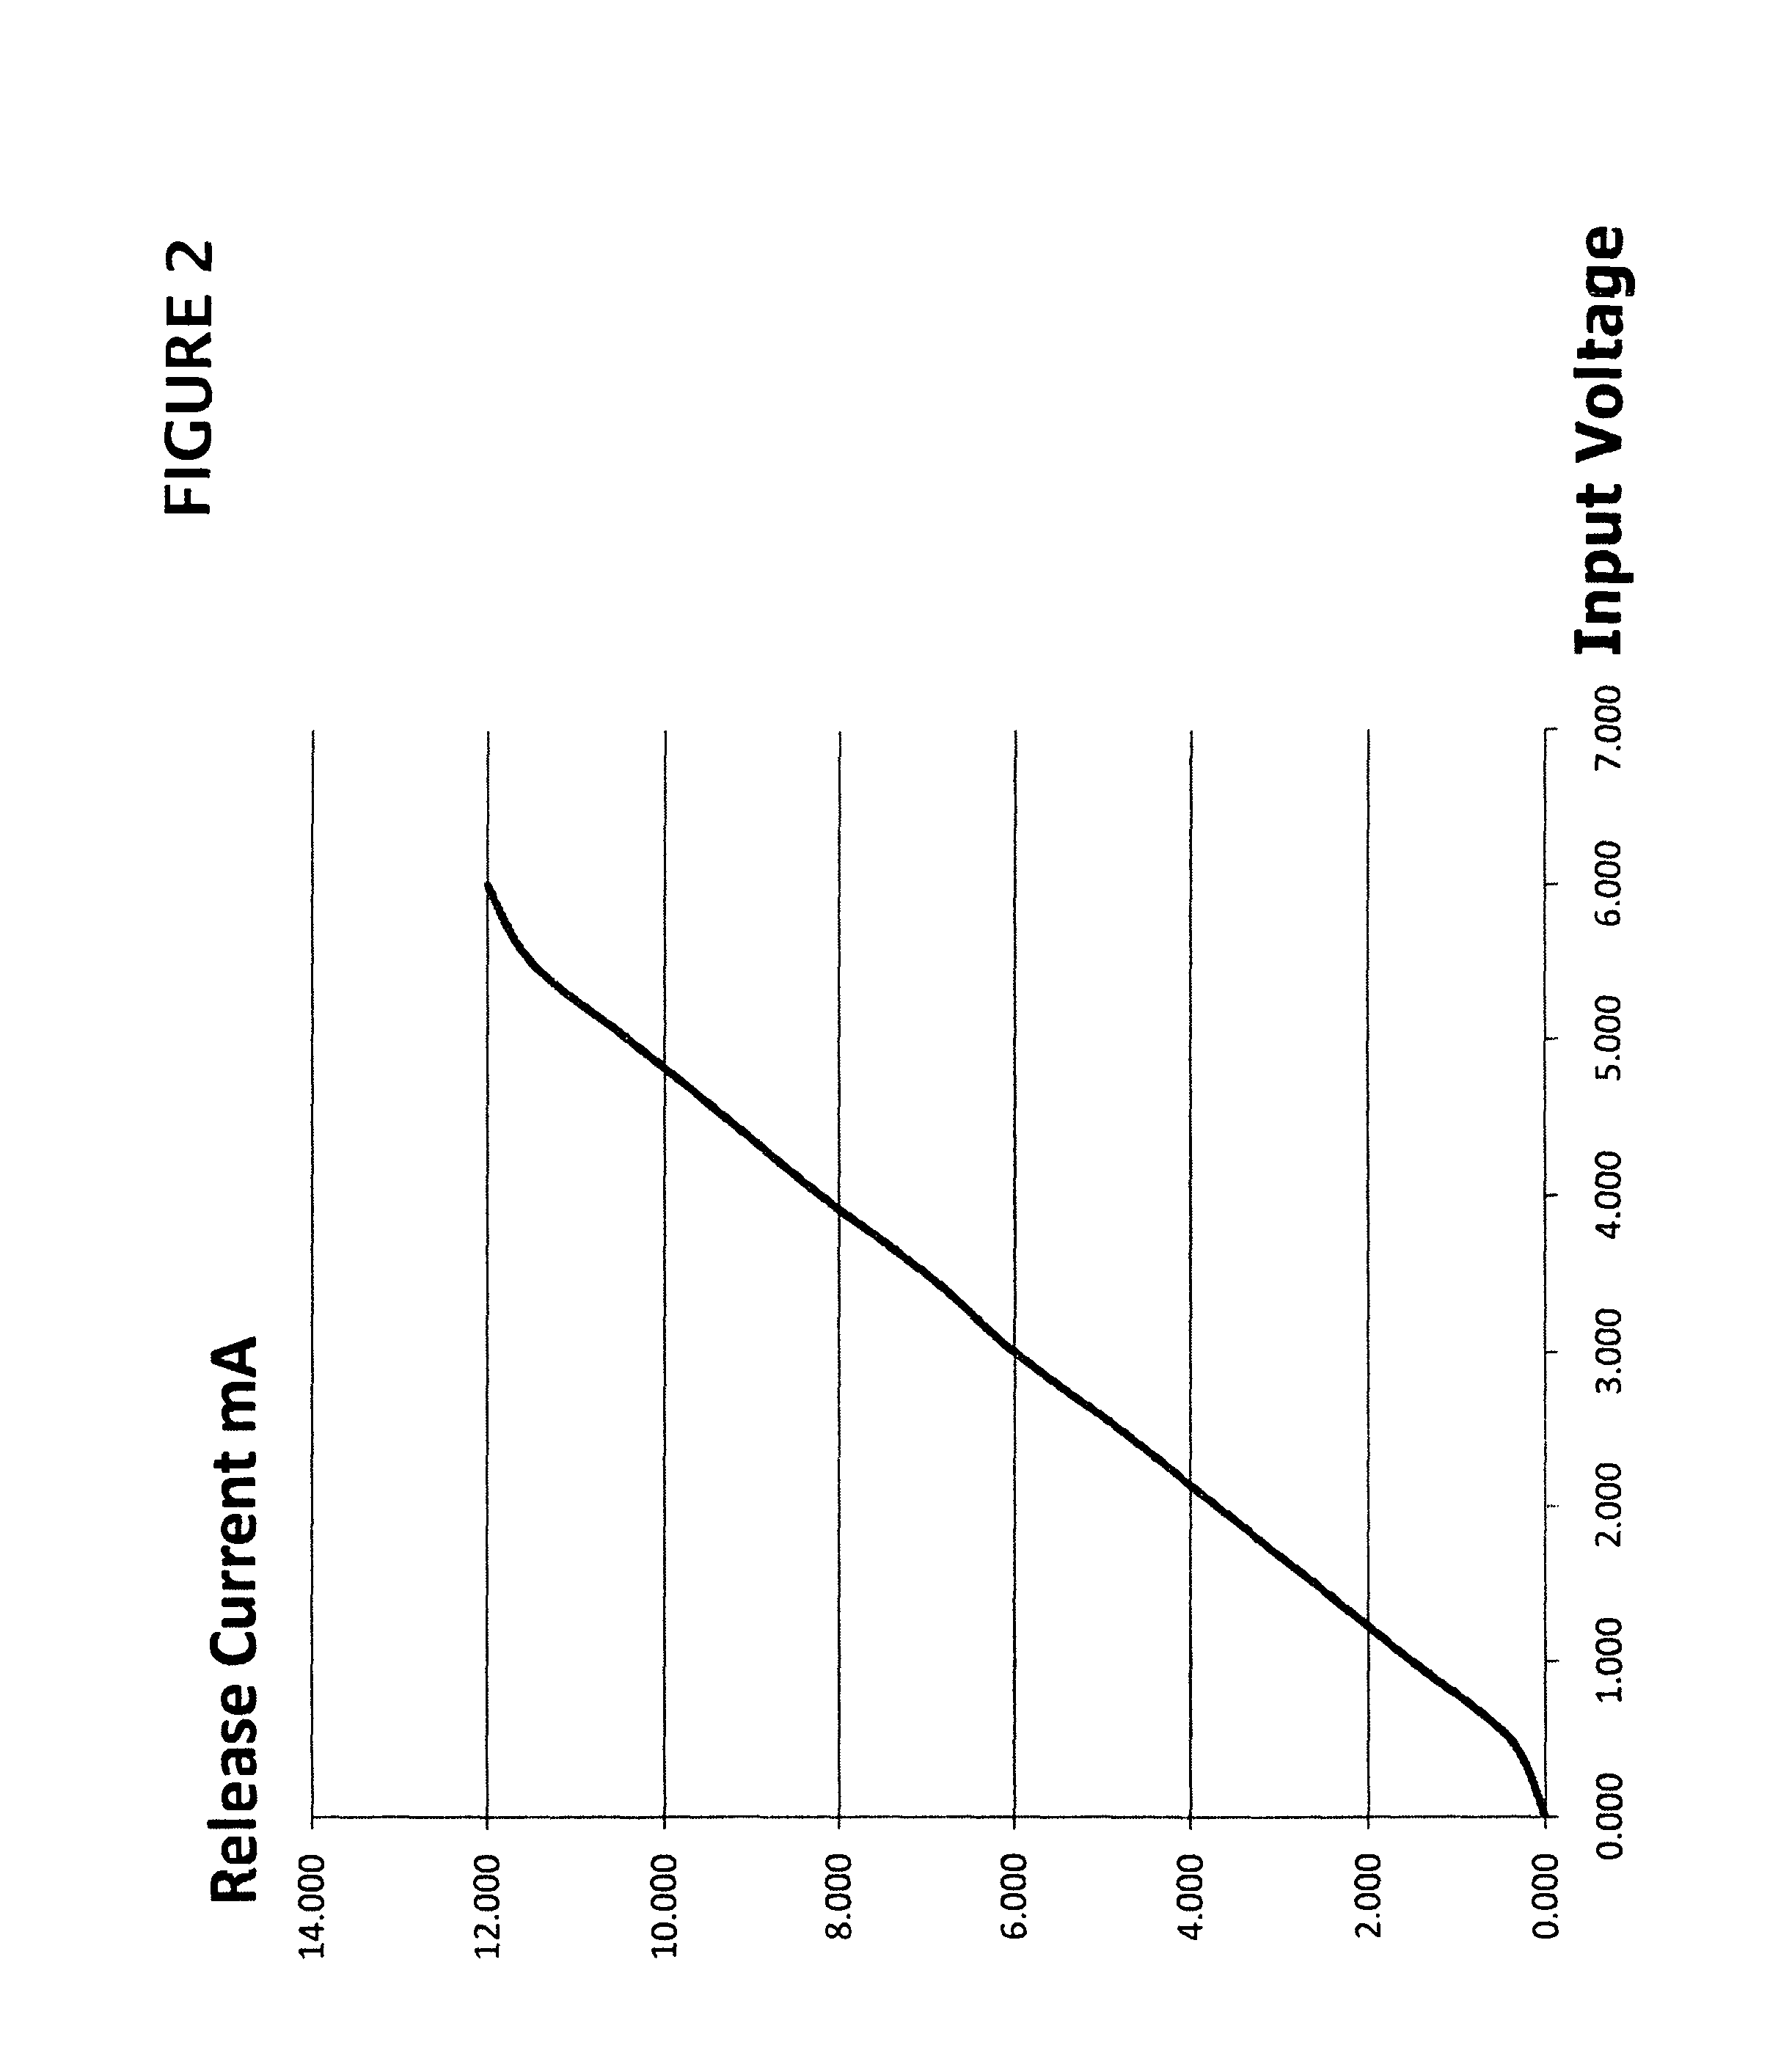 Audio dynamics processing control system with exponential release response